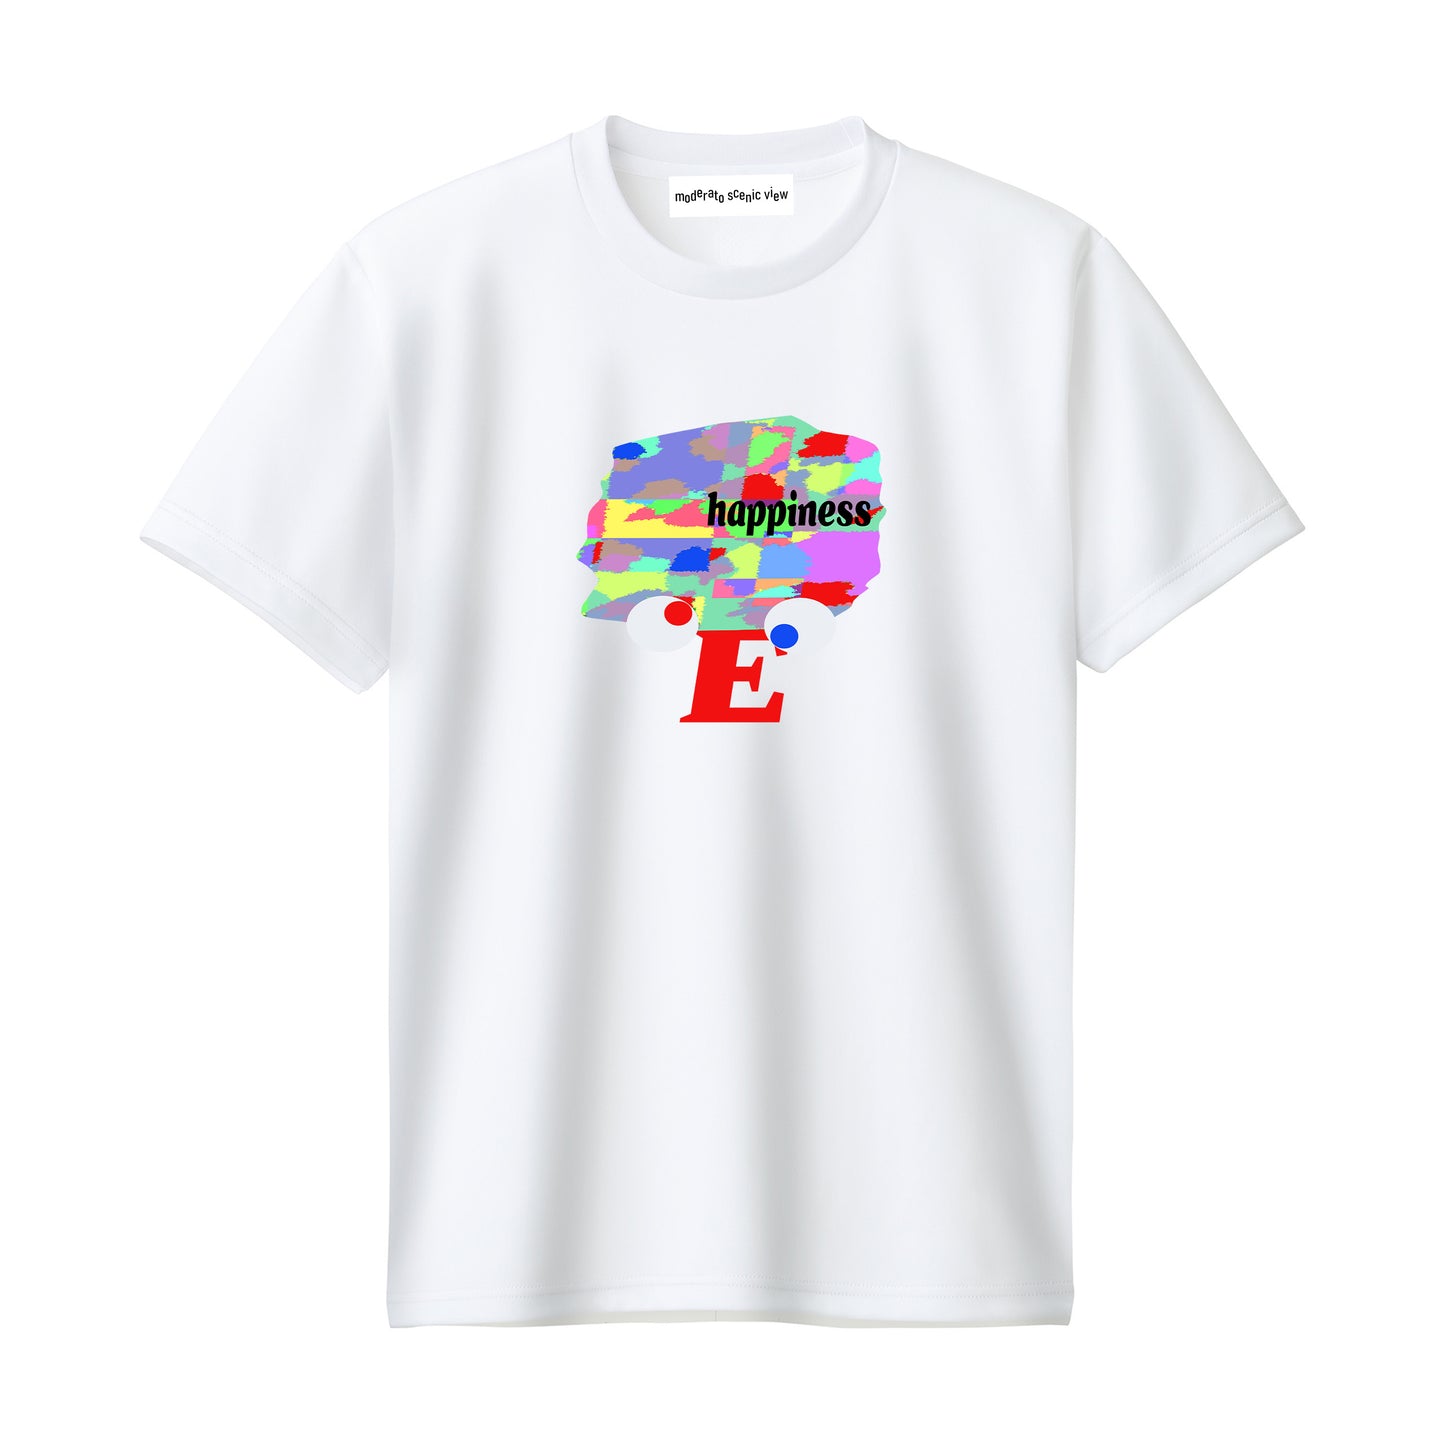 [moderato scenic view] T-shirts [Brain on the happiness]